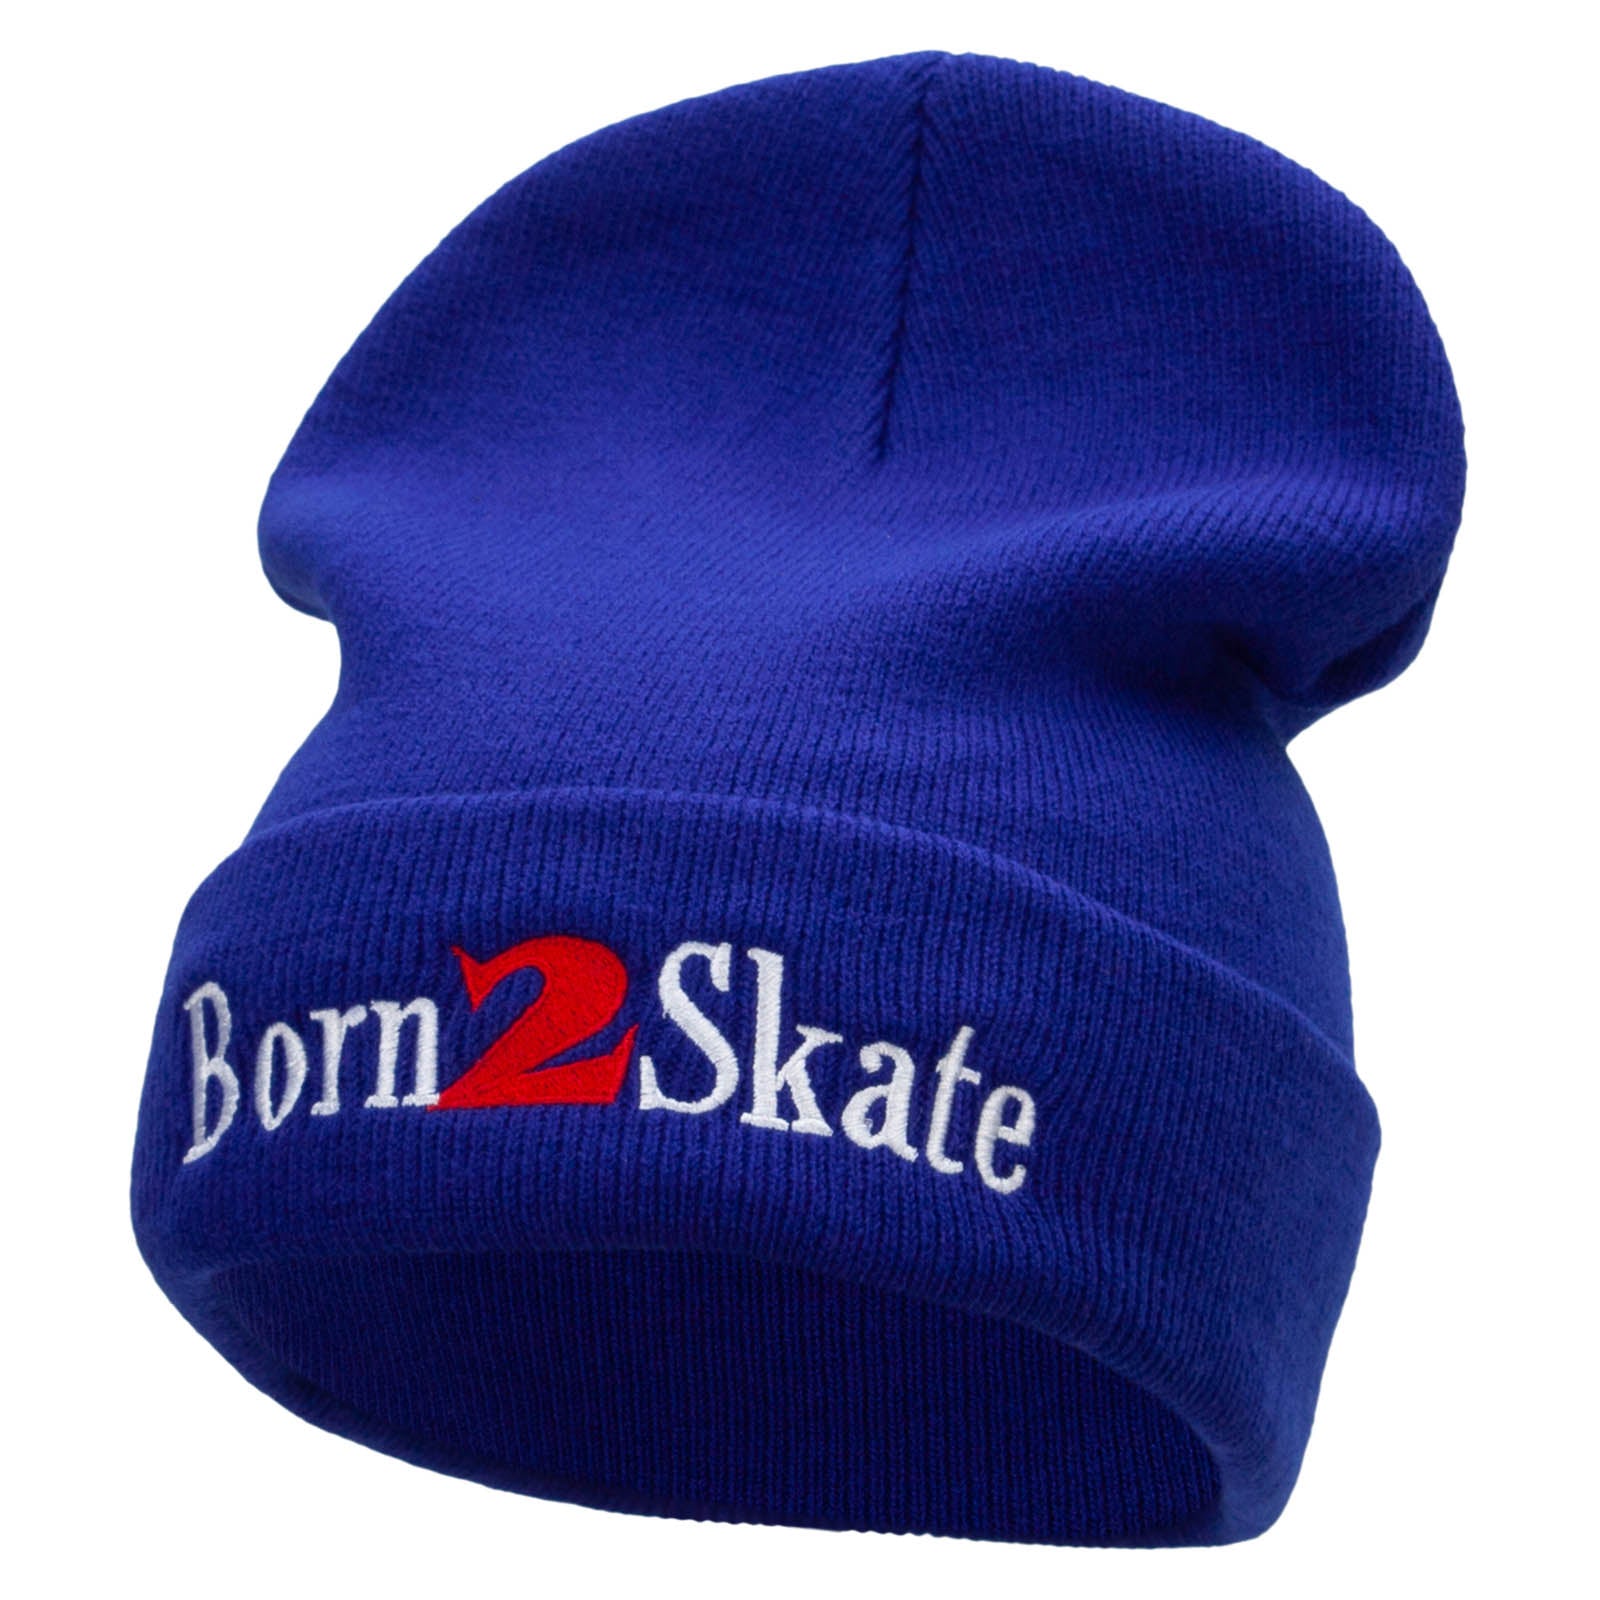 Born 2 Skate Embroidered 12 Inch Long Knitted Beanie - Royal OSFM